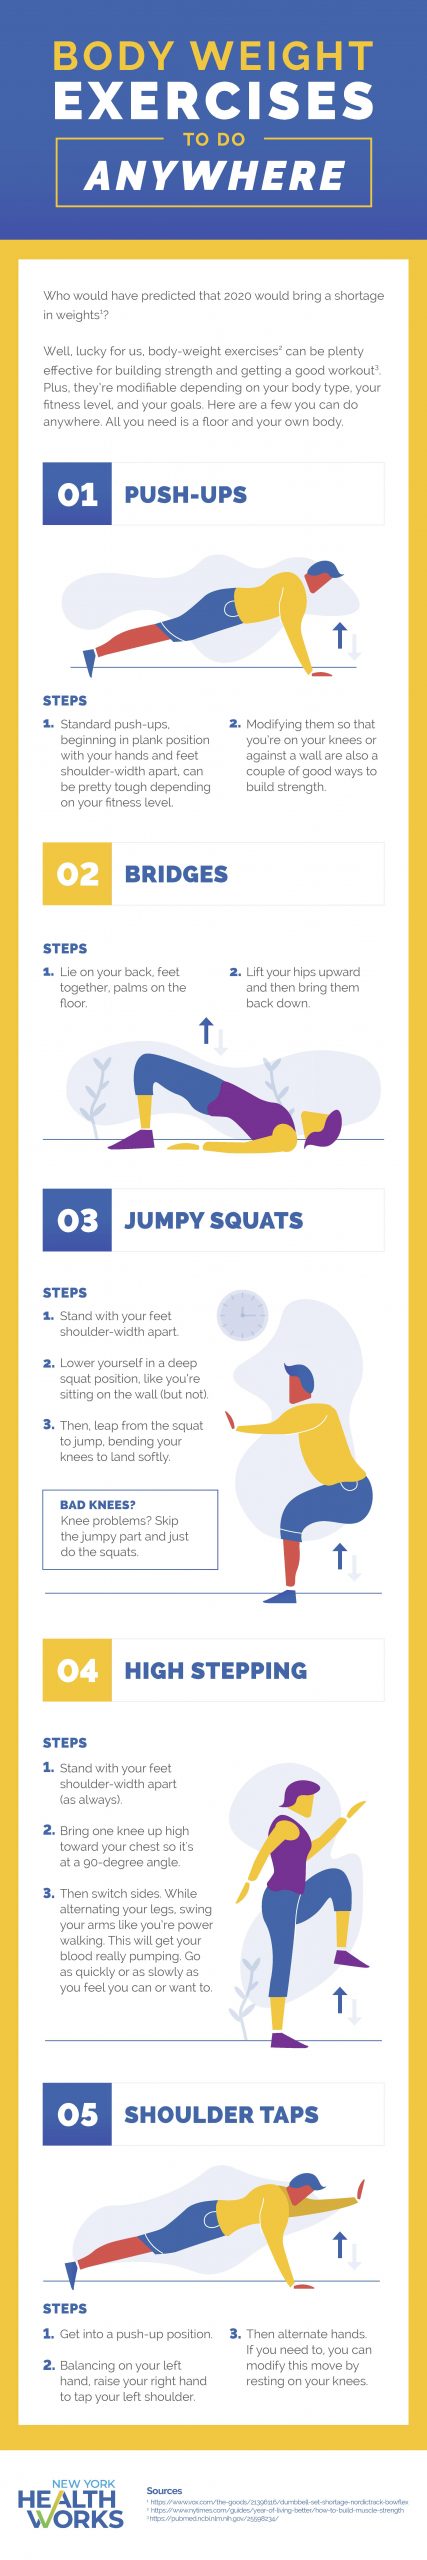 https://nyhealthworks.com/wp-content/uploads/2020/09/NYHW_SOW101402_Infographic_BodyWeights_02-1-page-001-scaled.jpg